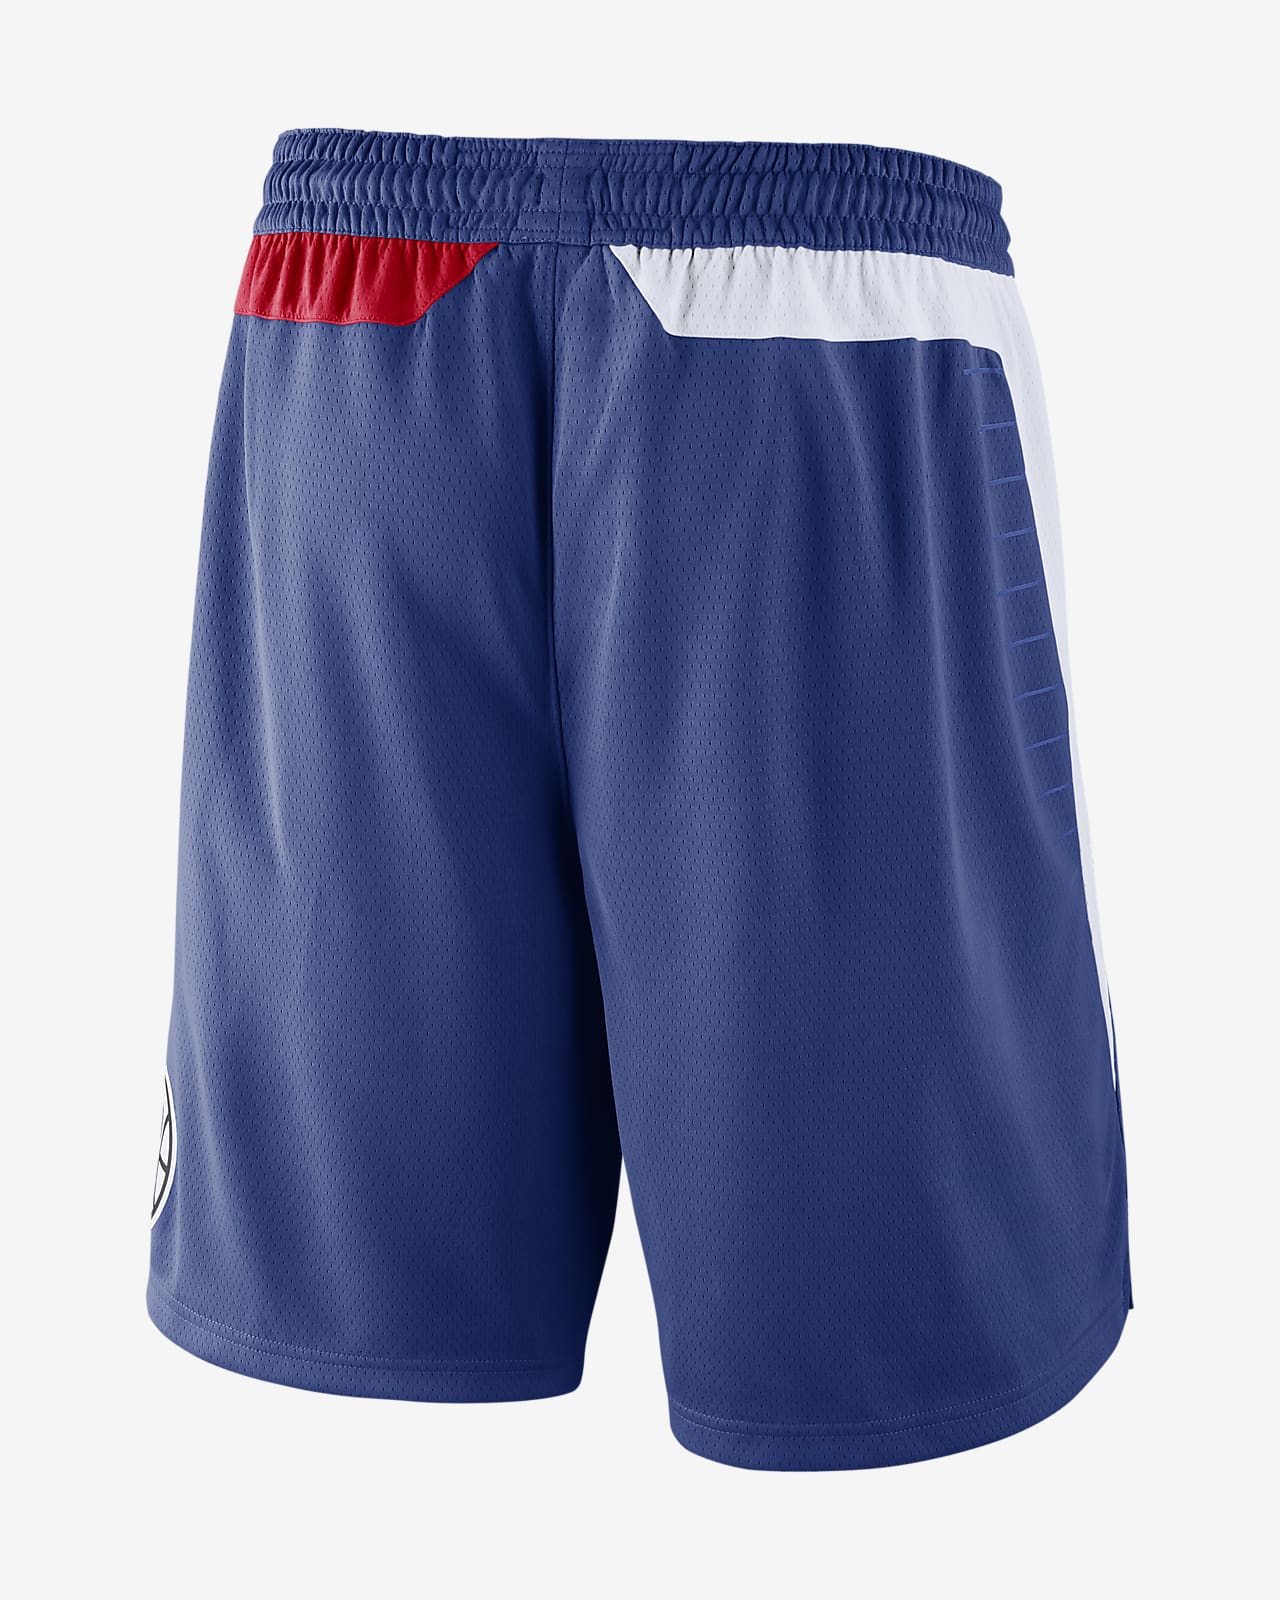 Men Basketball Tights NBA Clippers Blue